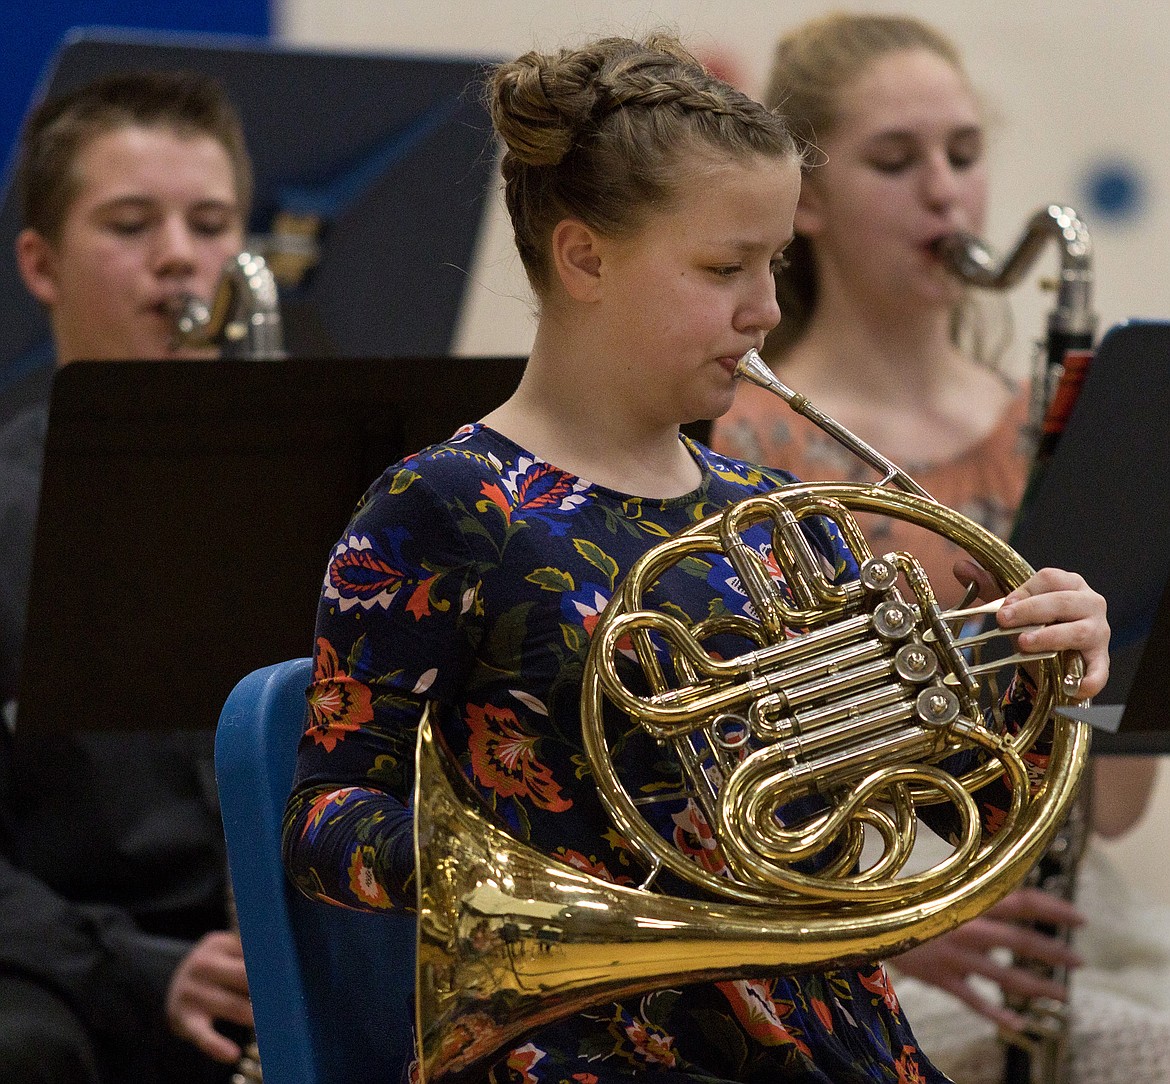 Zane Nordwick, left, Hannah Carlisle, foreground, and Ember Rode perform in the combined sixth- and eighth-grade bands during a concert in the Libby Elementary School gym on Tuesday, March 27, 2018. (John Blodgett/The Western News)